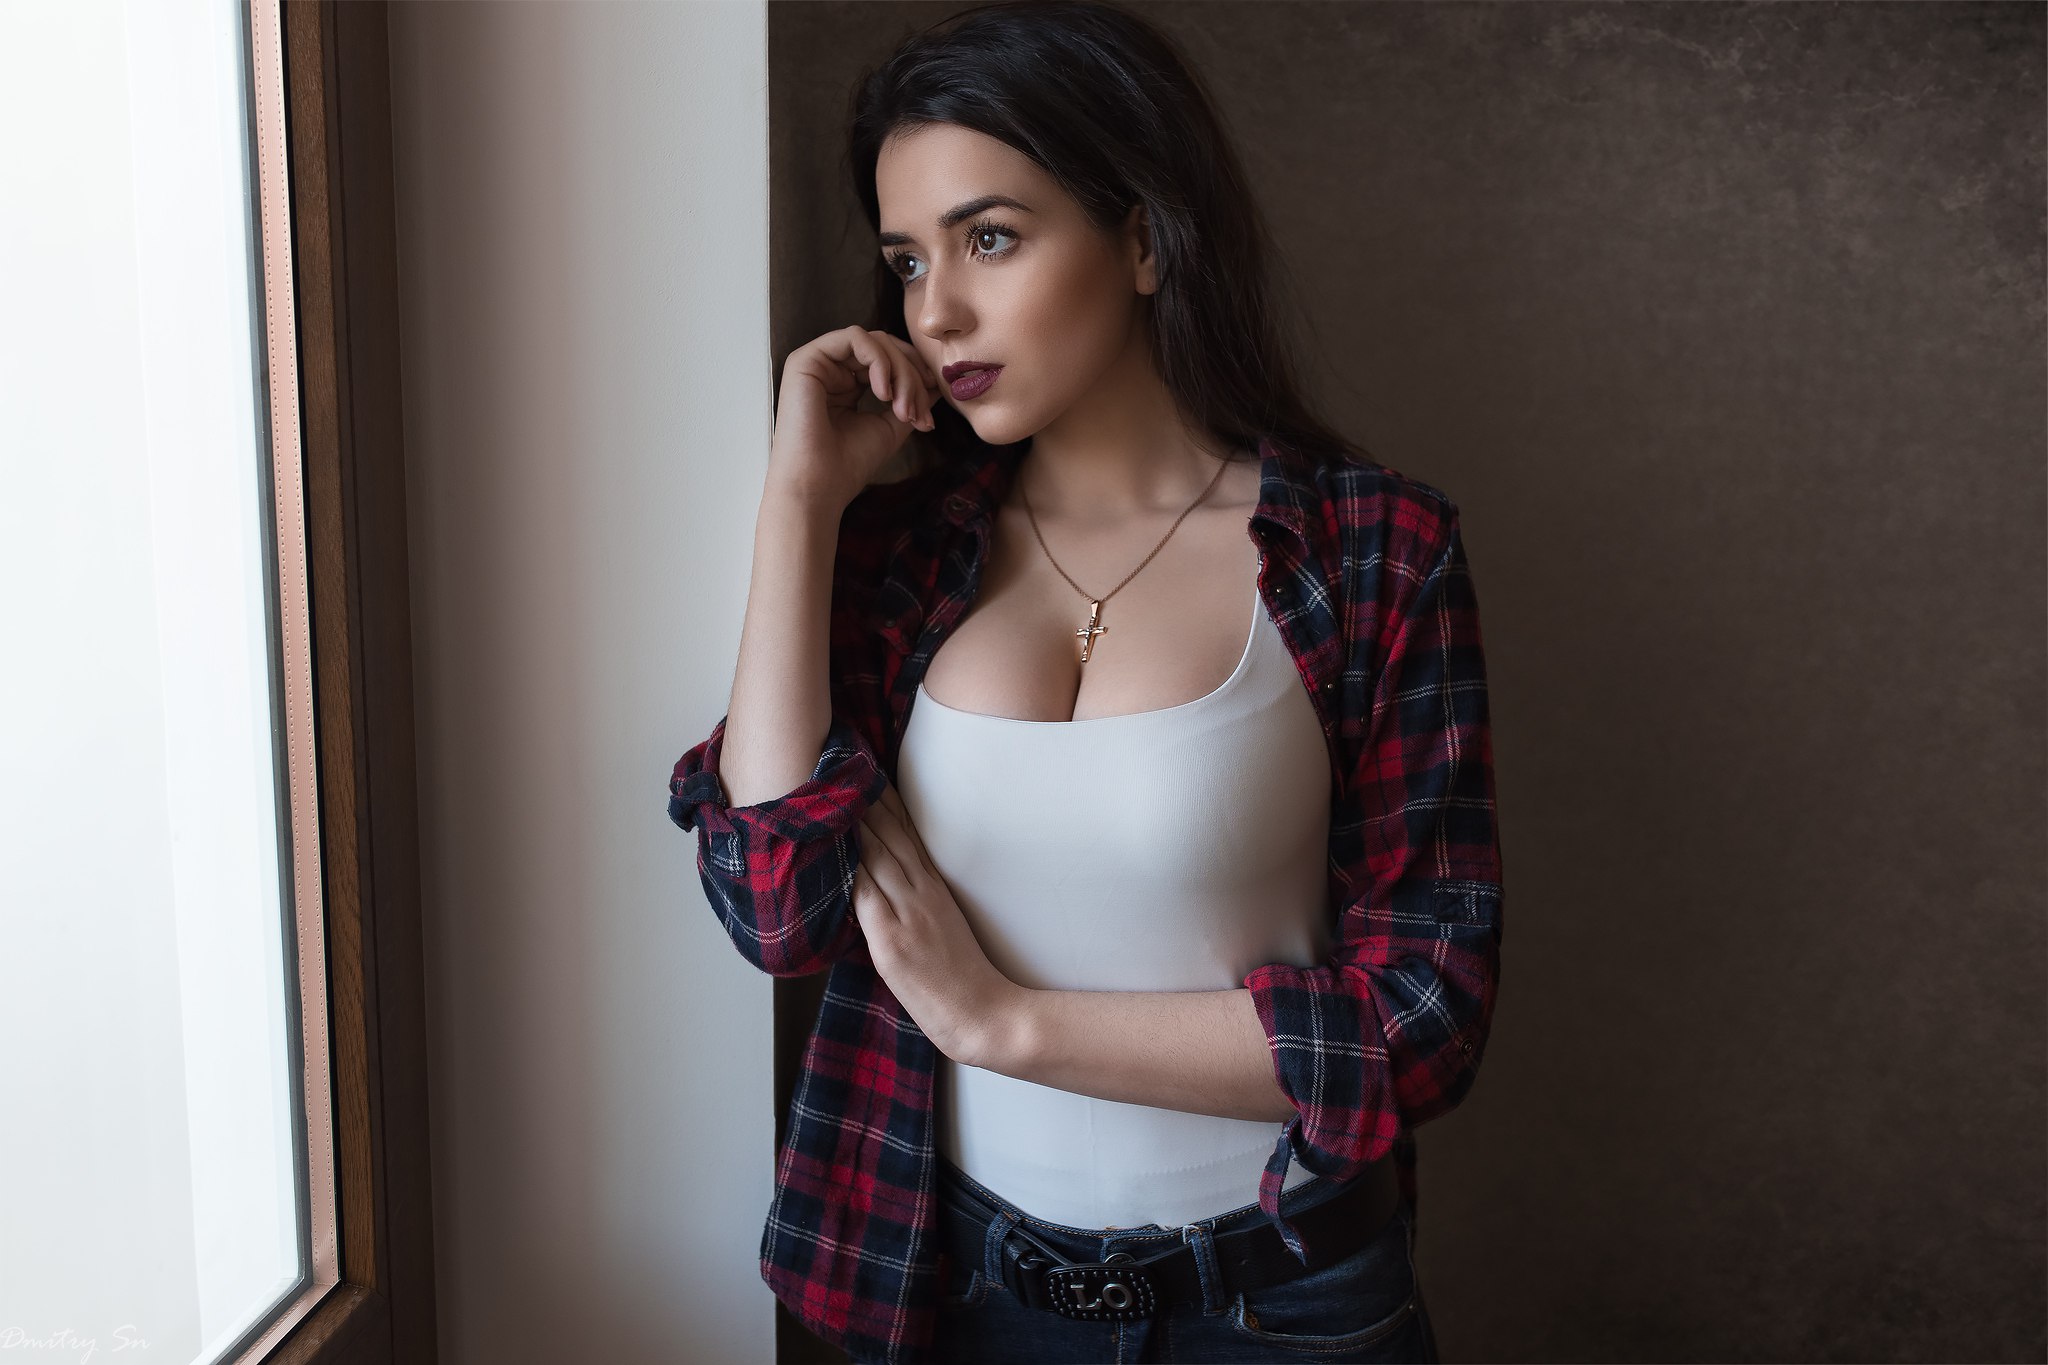 People 2048x1365 Dmitry Shulgin window women necklace red lipstick looking into the distance white tops plaid shirt cleavage big boobs open shirt looking out window brown eyes Kristina crucifix necklace by the window belt black belt